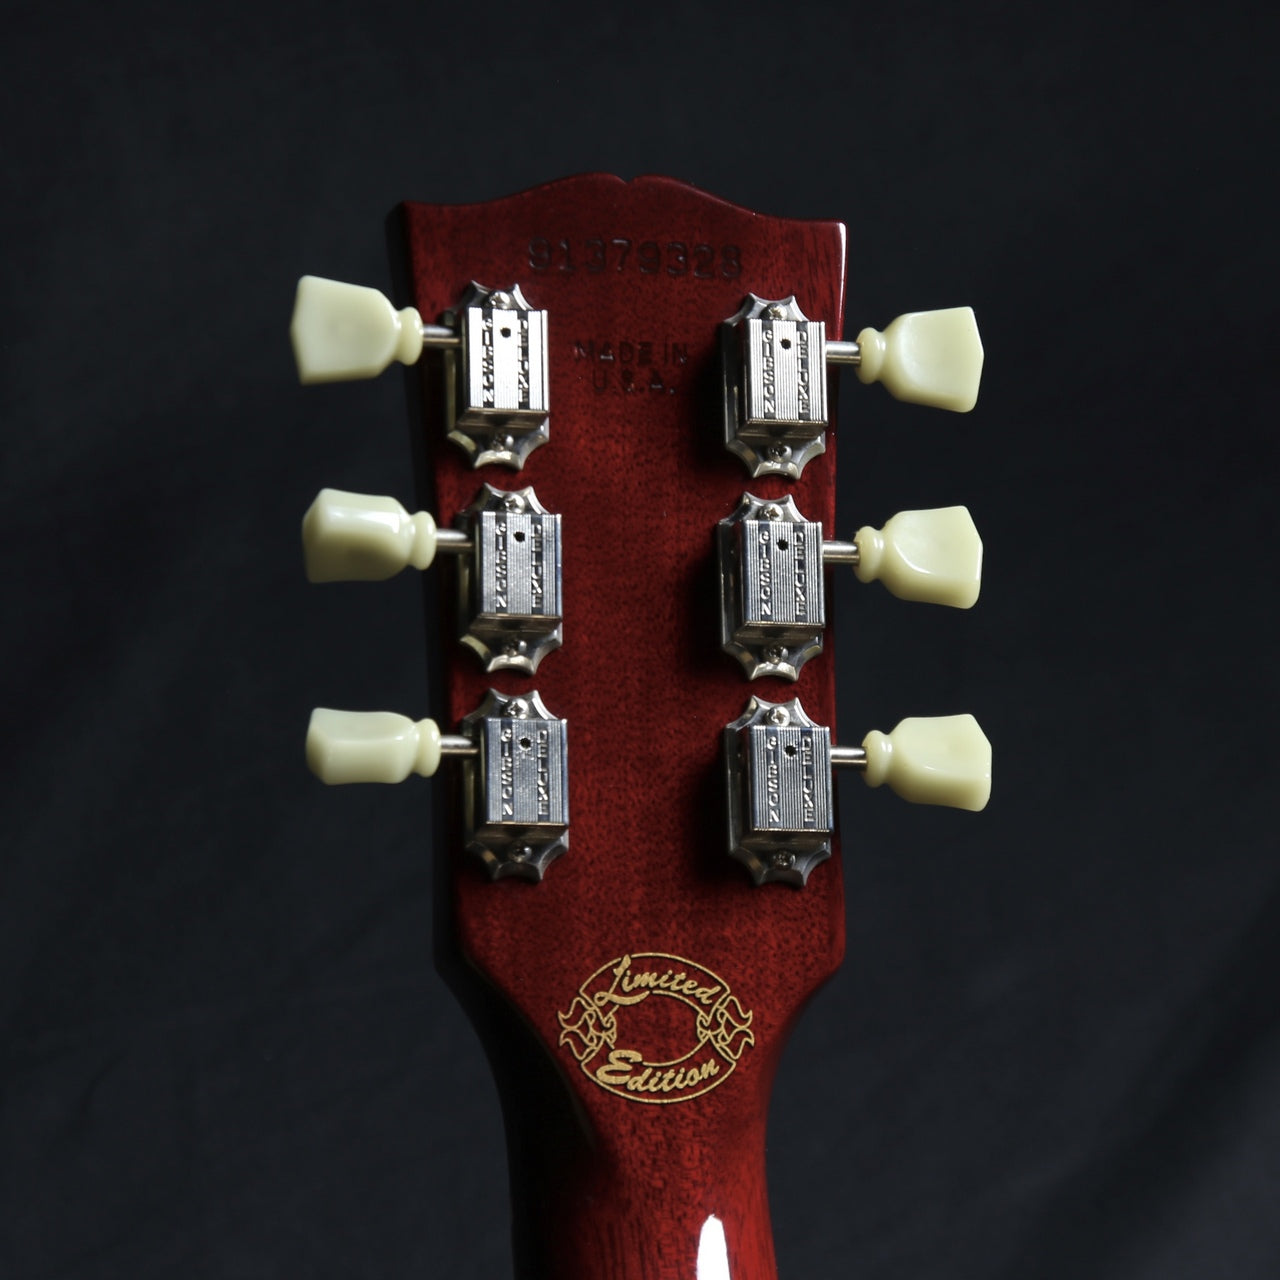 Gibson SG SPECIAL Limited Edition 1999